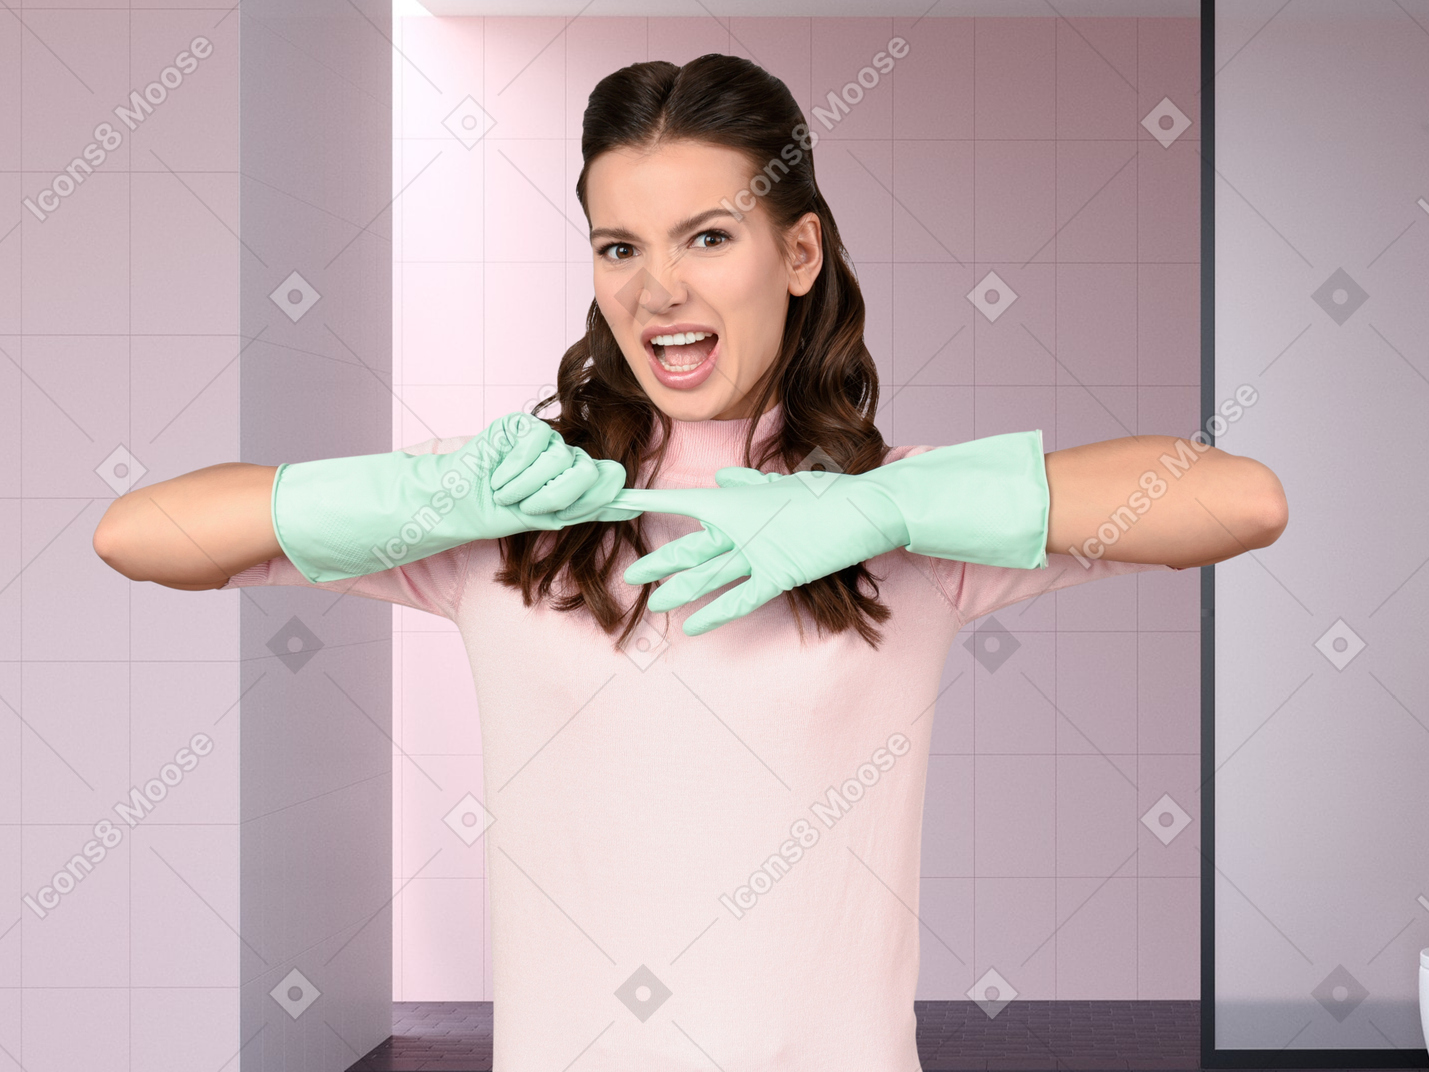 Angry young woman taking off a glove